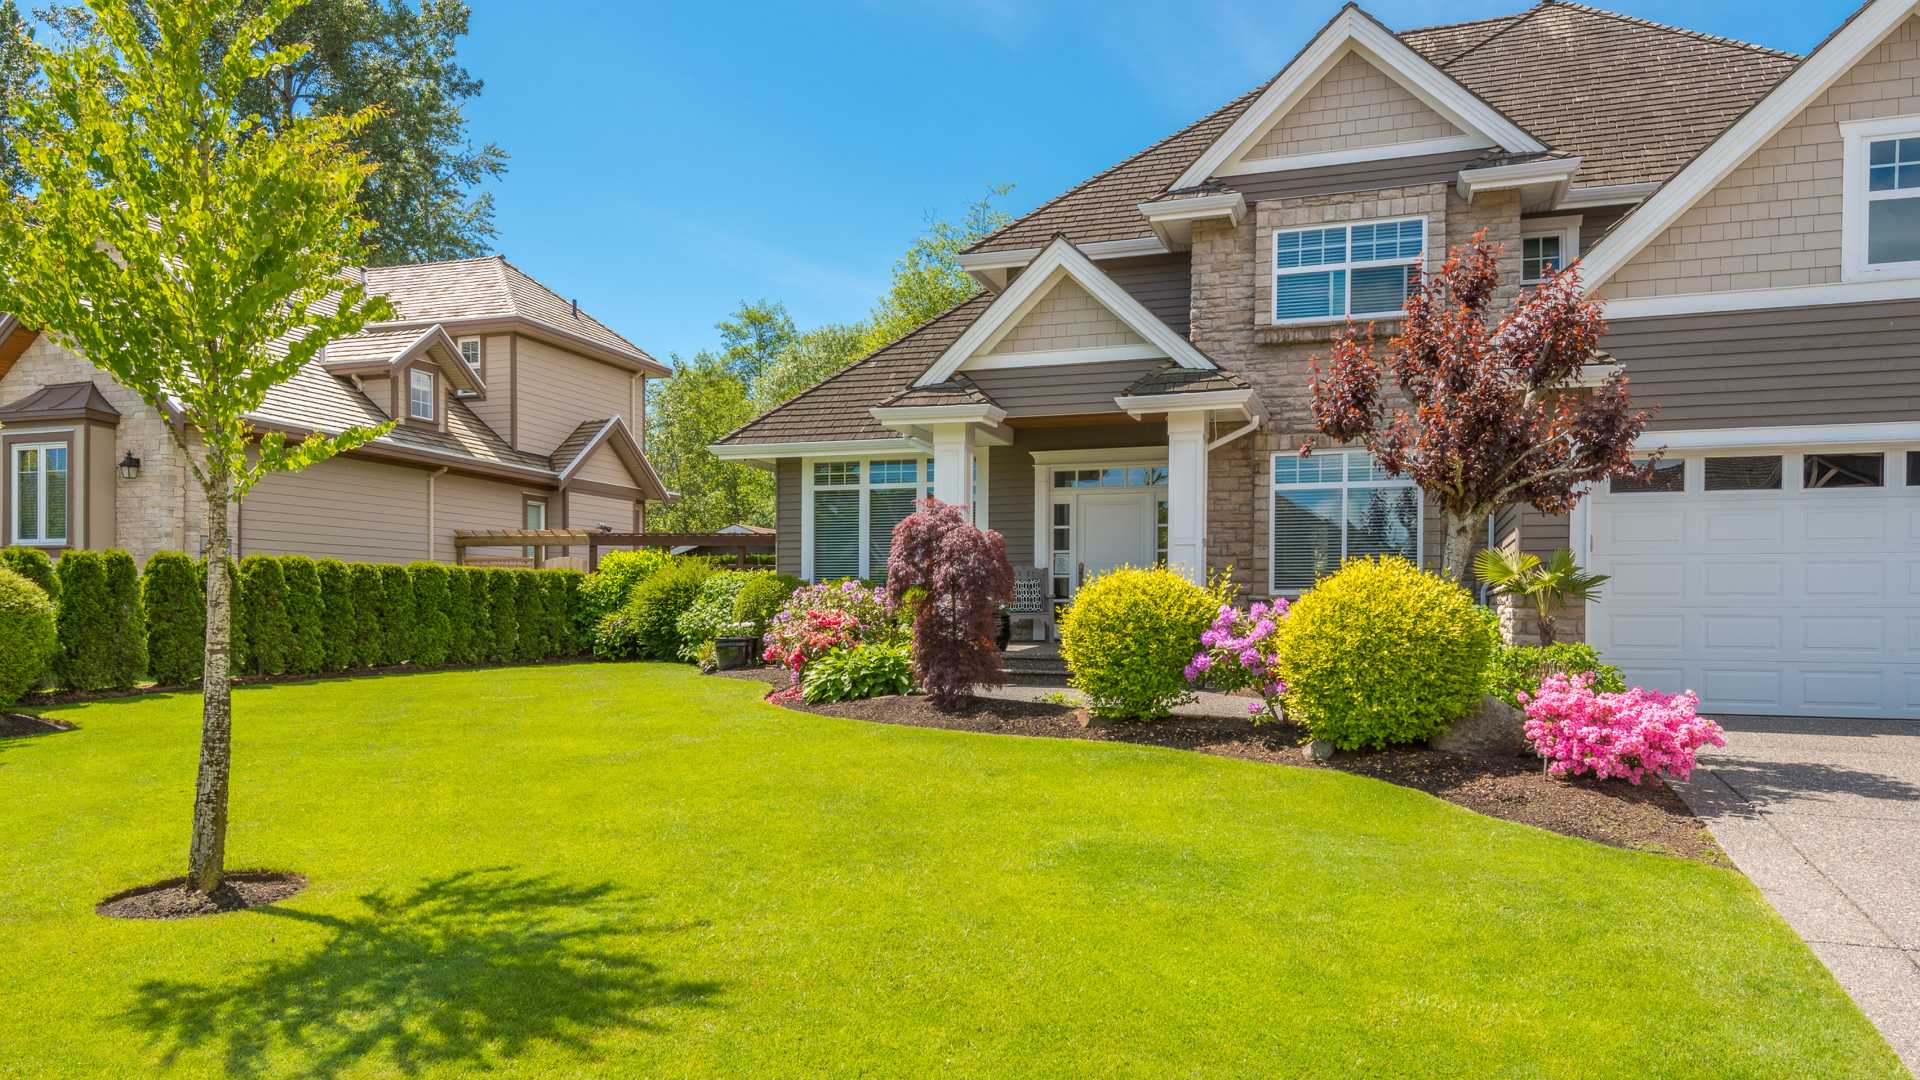 How to Get Pristine Year-Round Curb Appeal